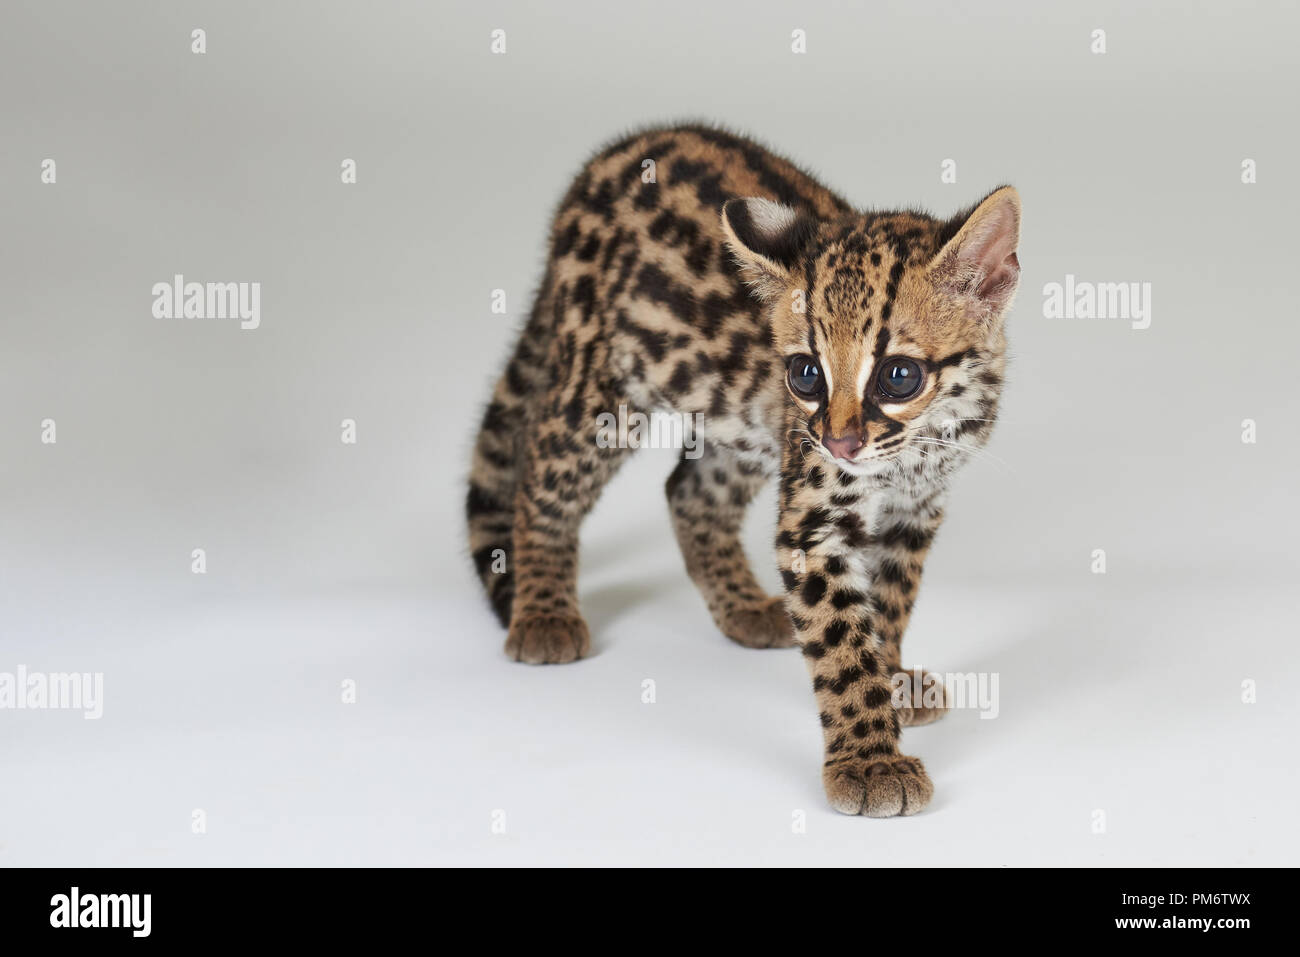 Small baby of wild cat isolated on white studio background Stock Photo